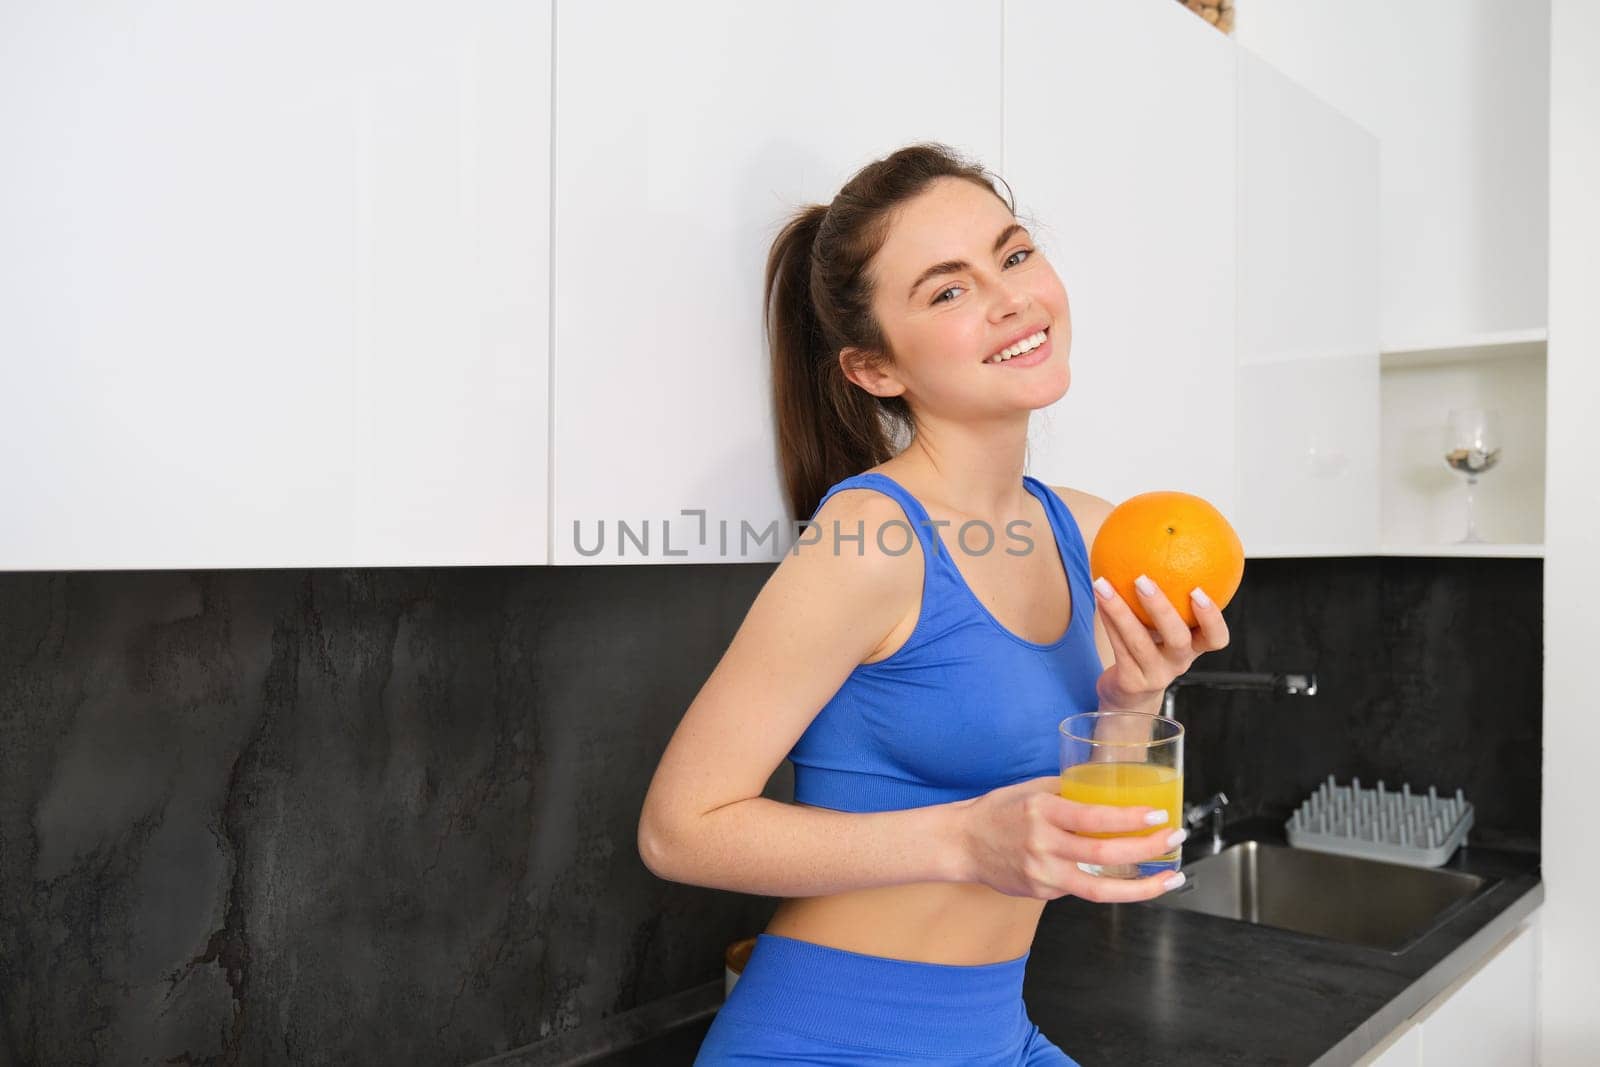 Indoor shot of woman after workout, standing in kitchen with fresh juice and an orange, drinking it.